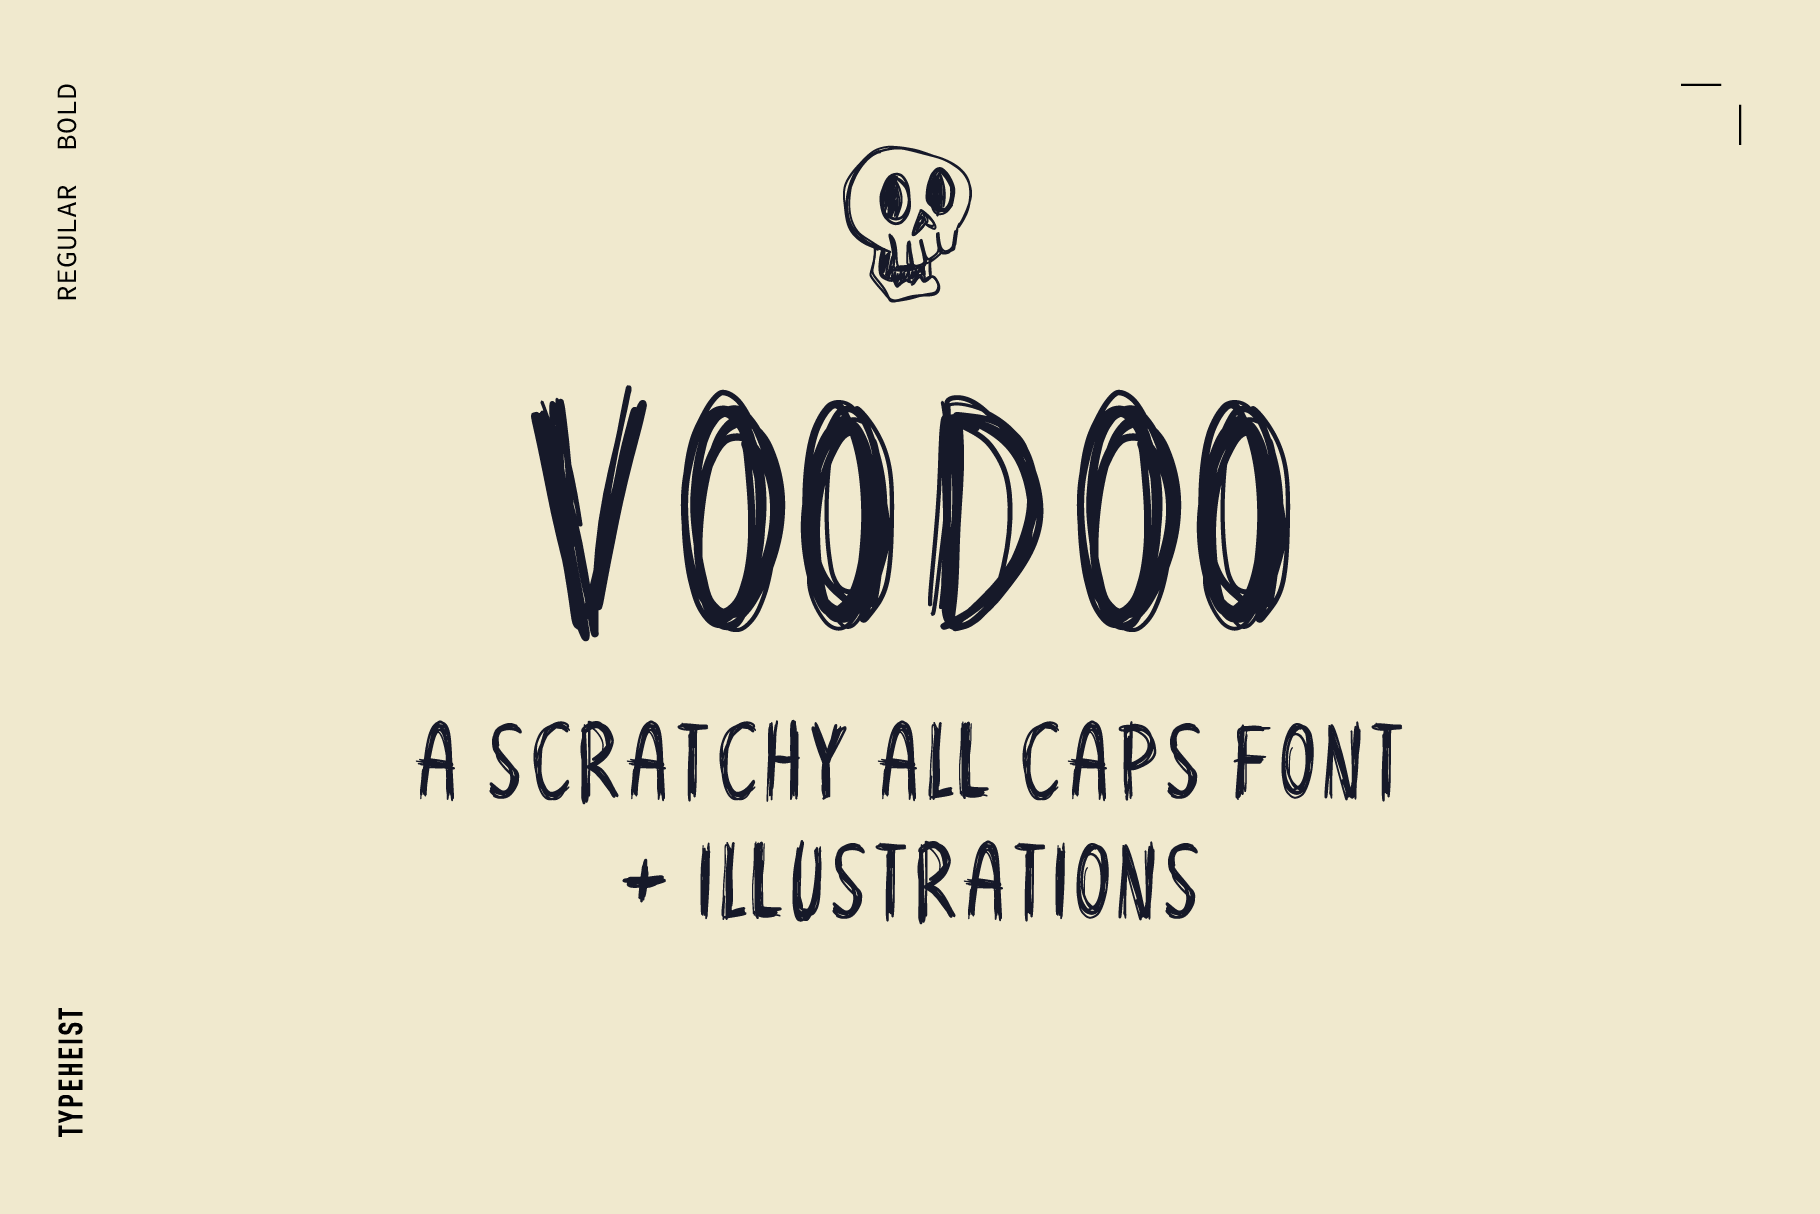 Voodoo: A scratchy, scribbled and all caps Halloween font